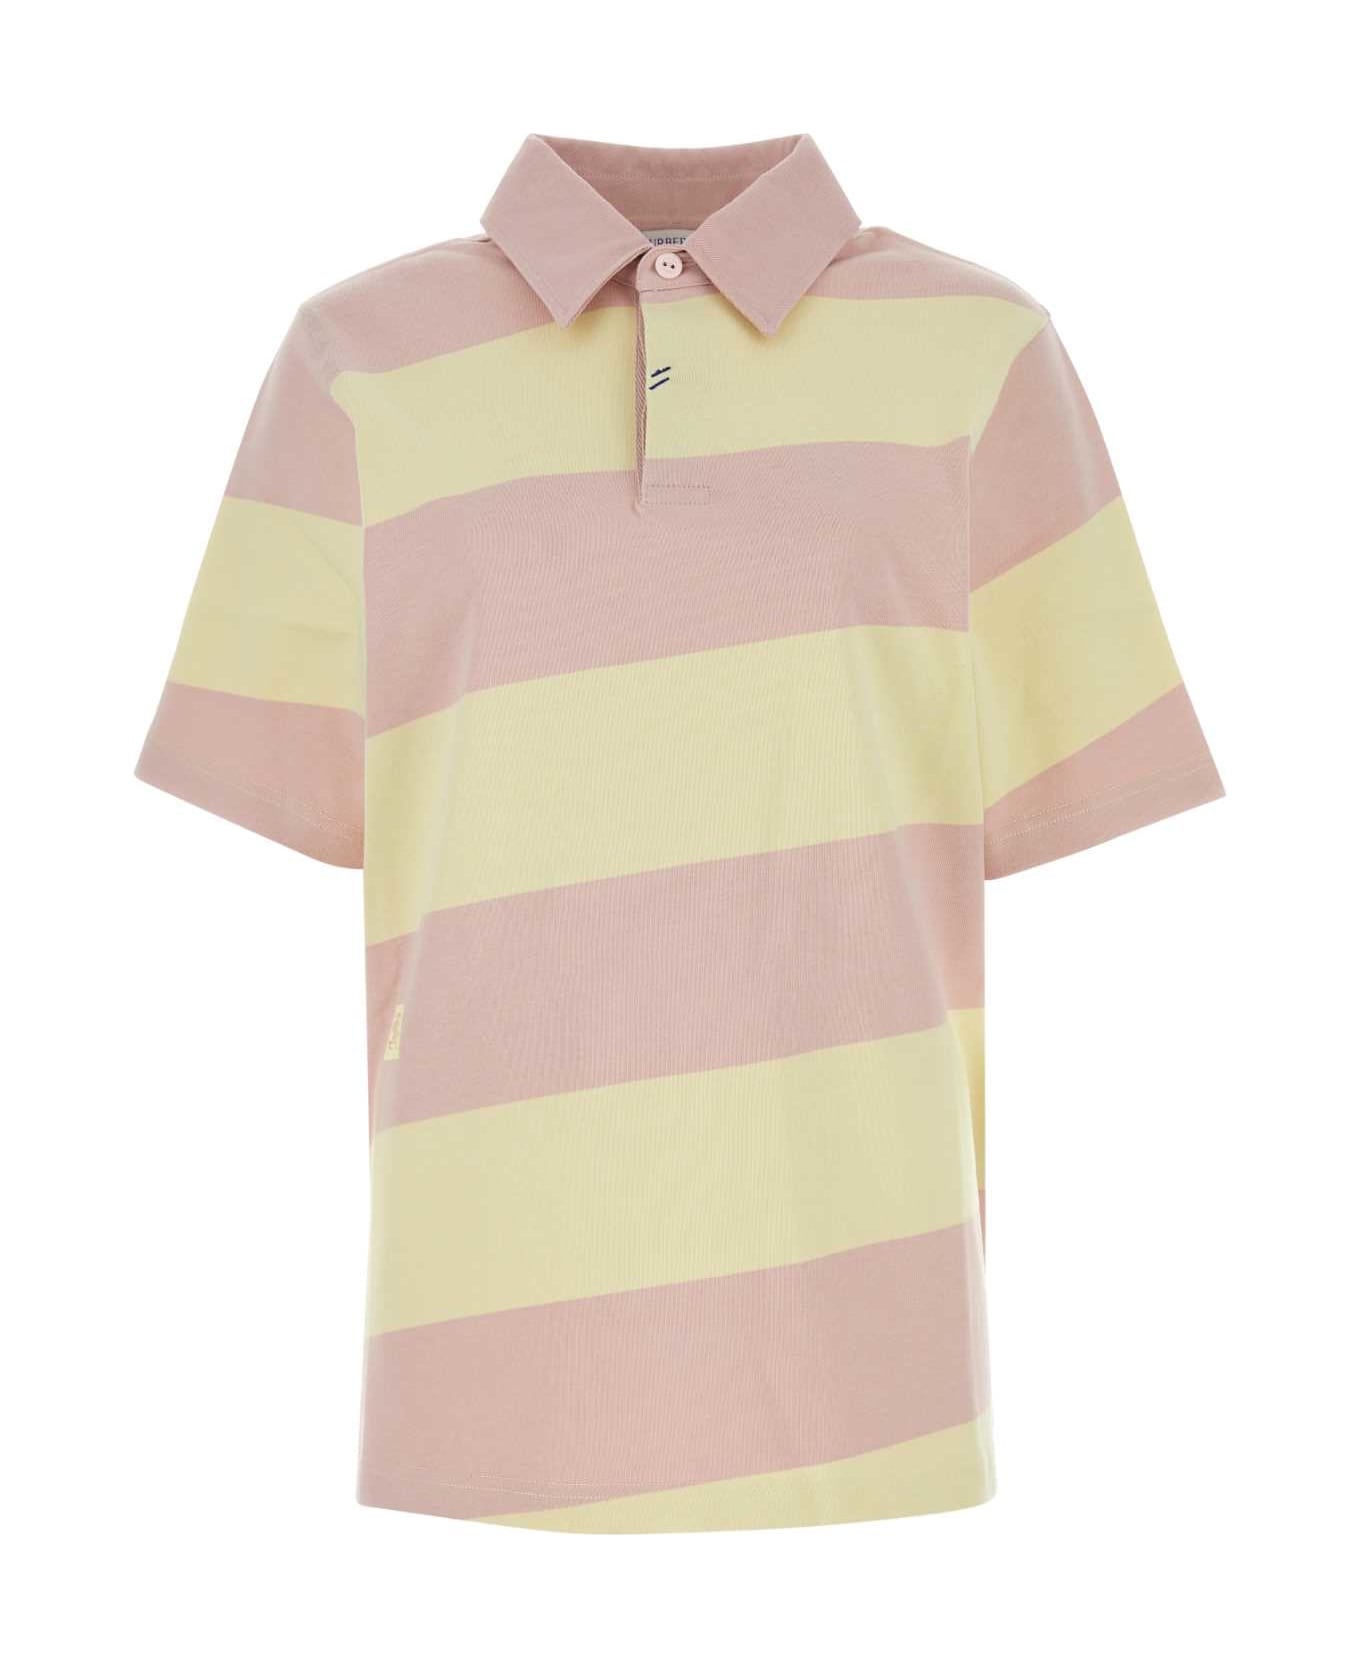 Burberry Embroidered Cotton Polo Shirt - CAMEOIPPATTERN